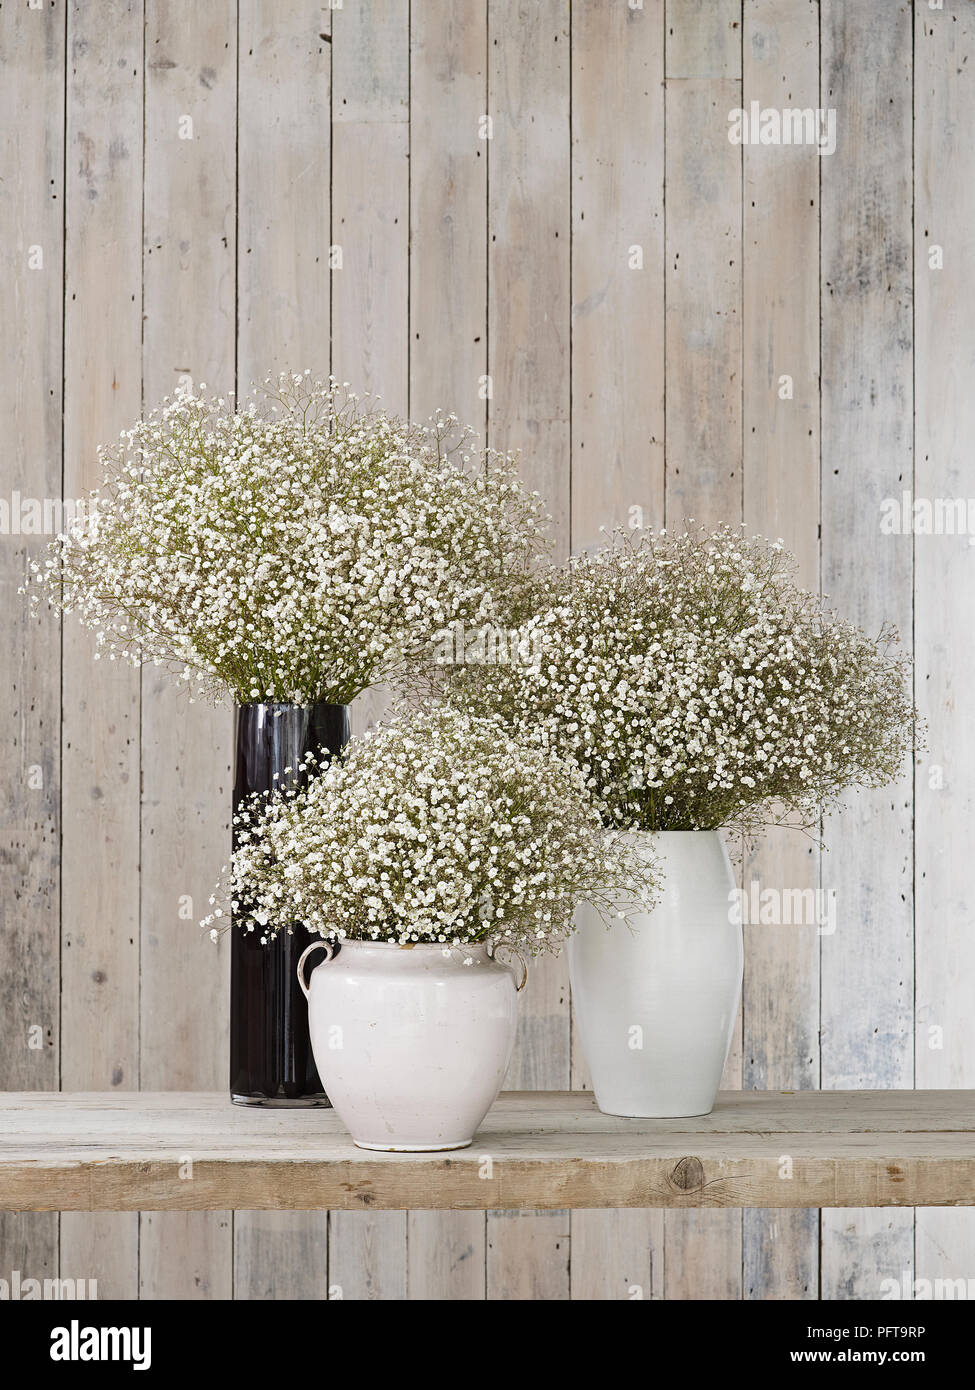 Gypsophila flowers in vases of different shapes, against wooden background Stock Photo